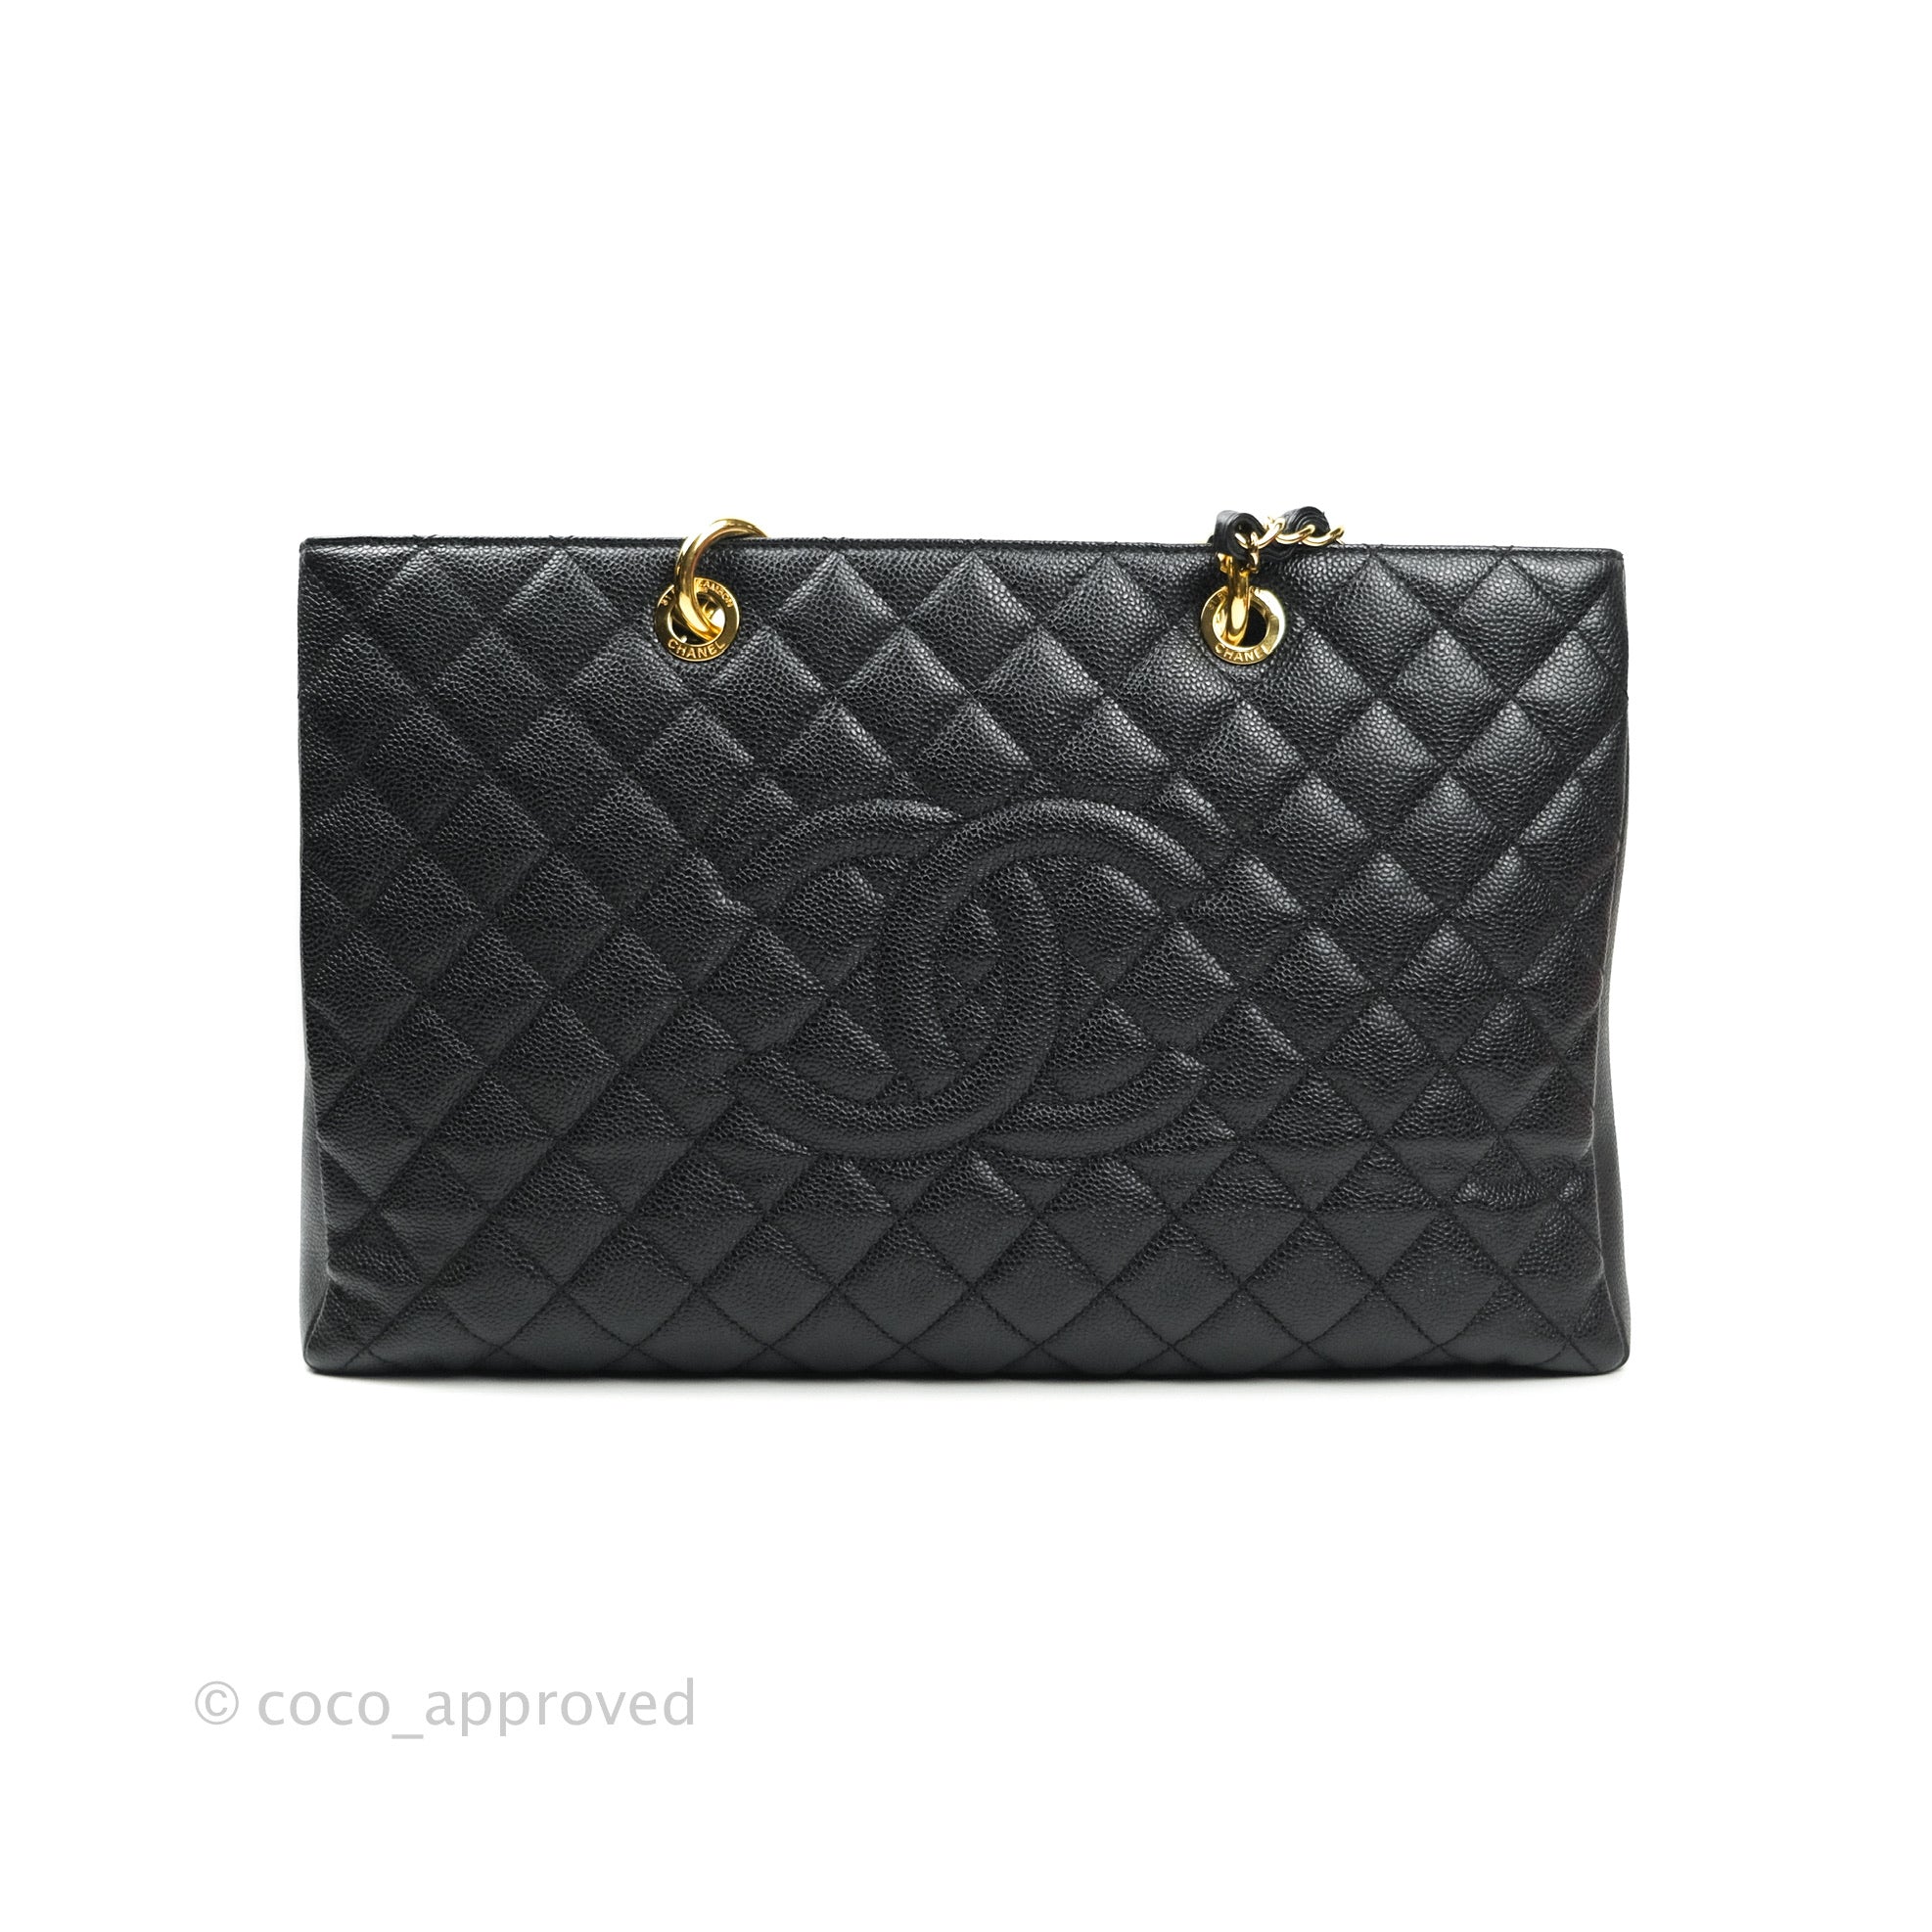 Black Grand Shopping Tote in caviar calfskin with gold hardware